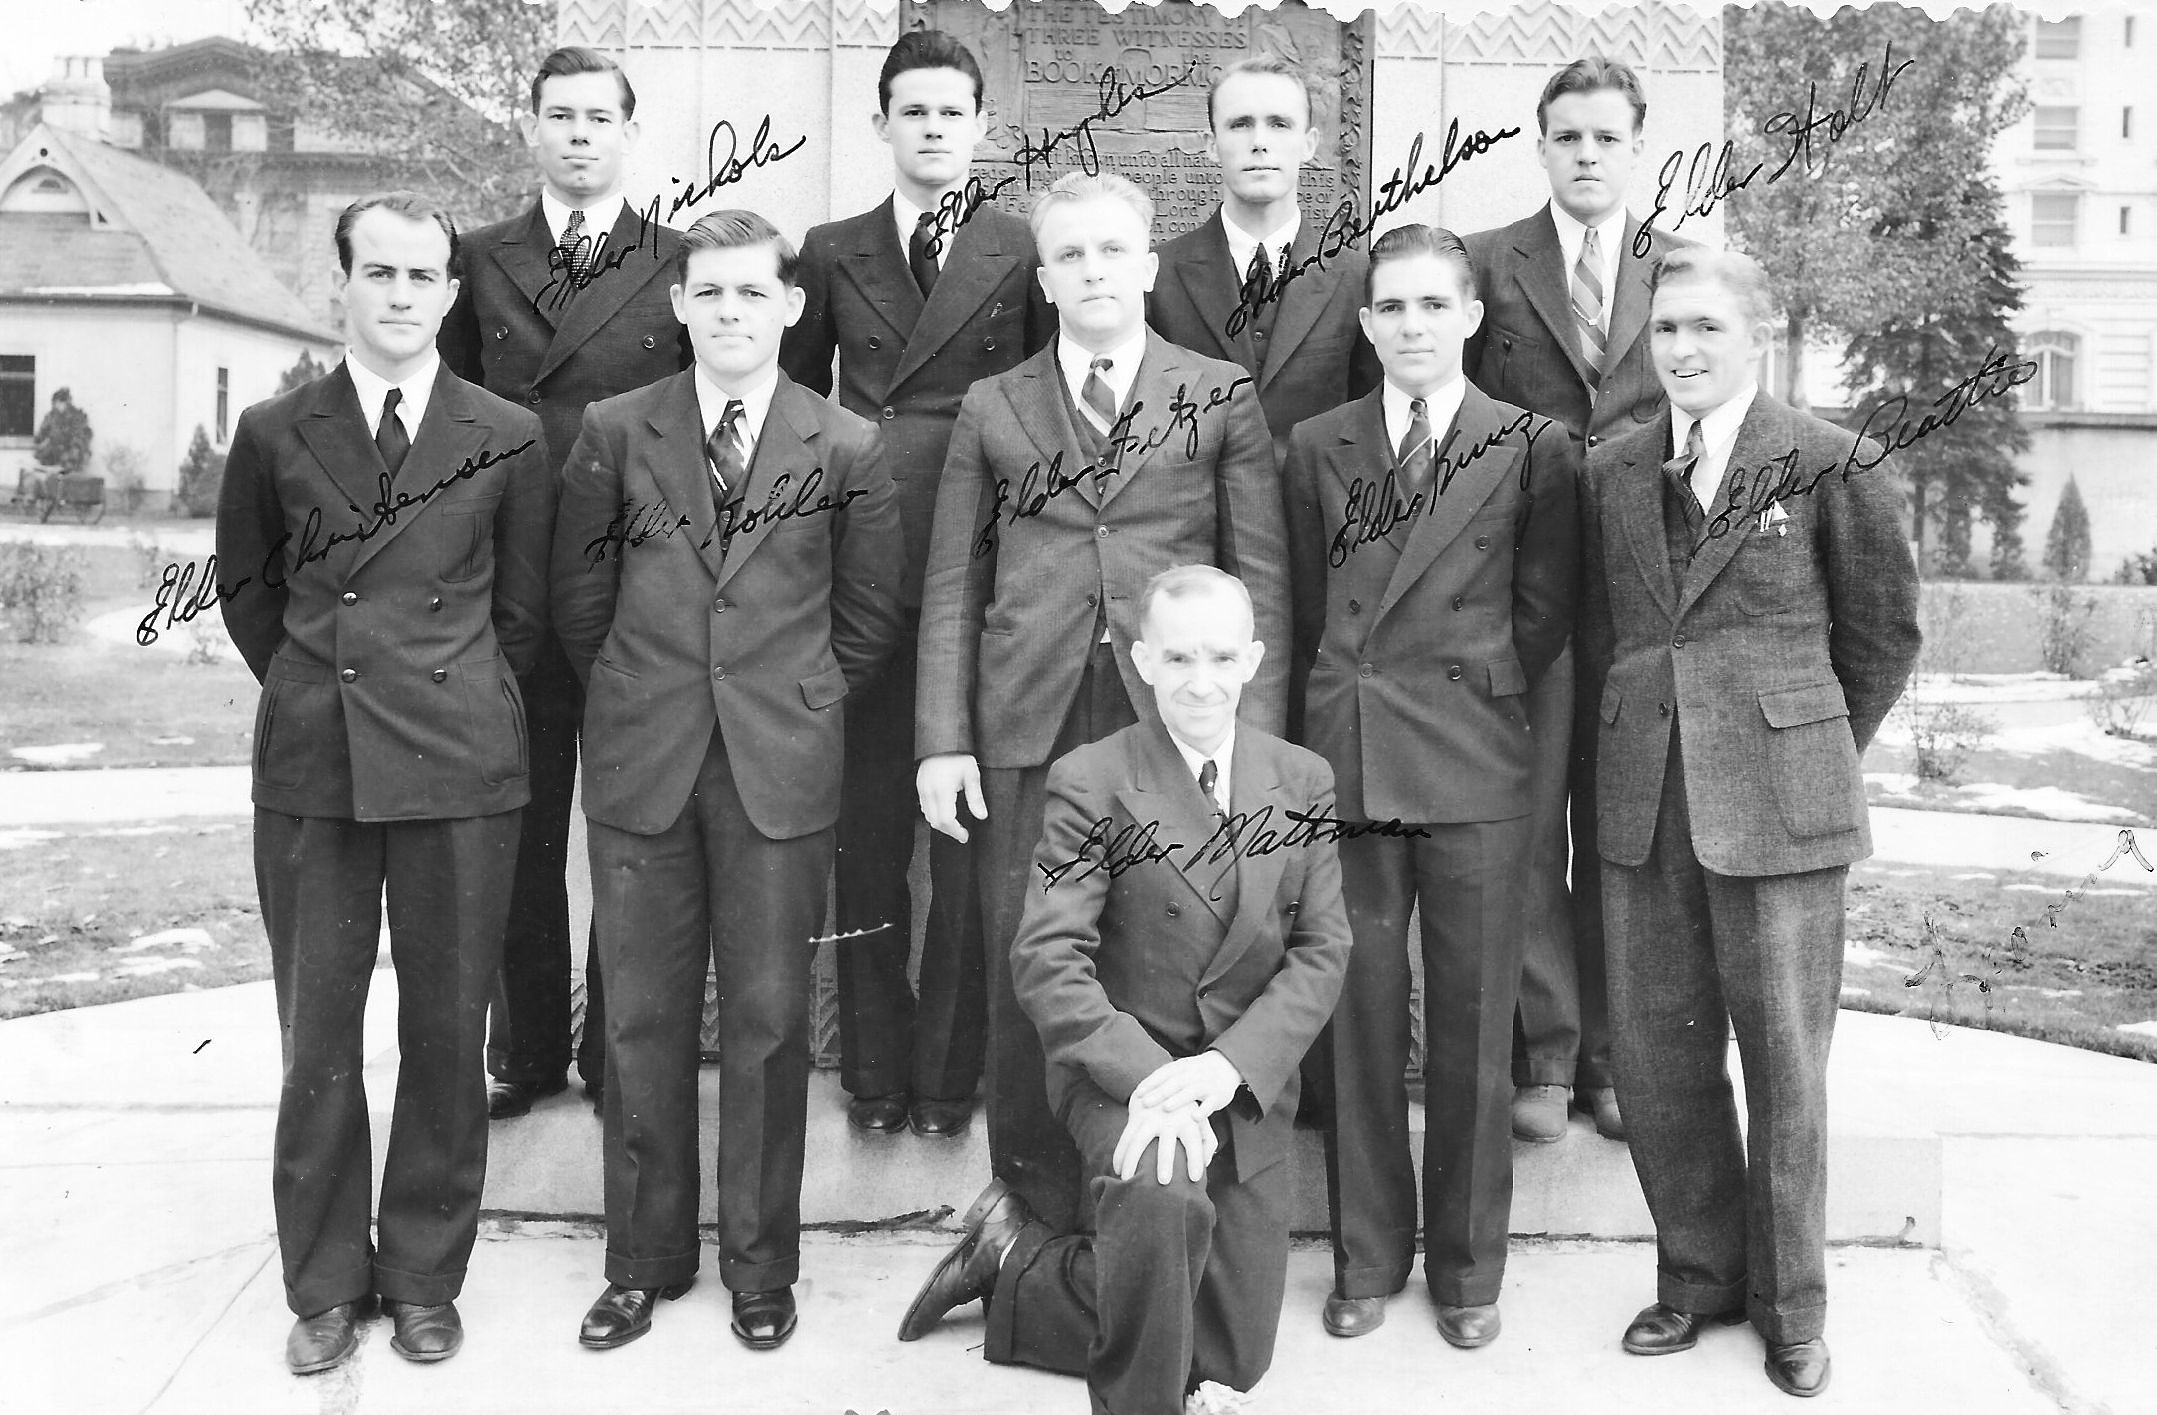 Missionary group, probably in training in Salt Lake City, ca 1936